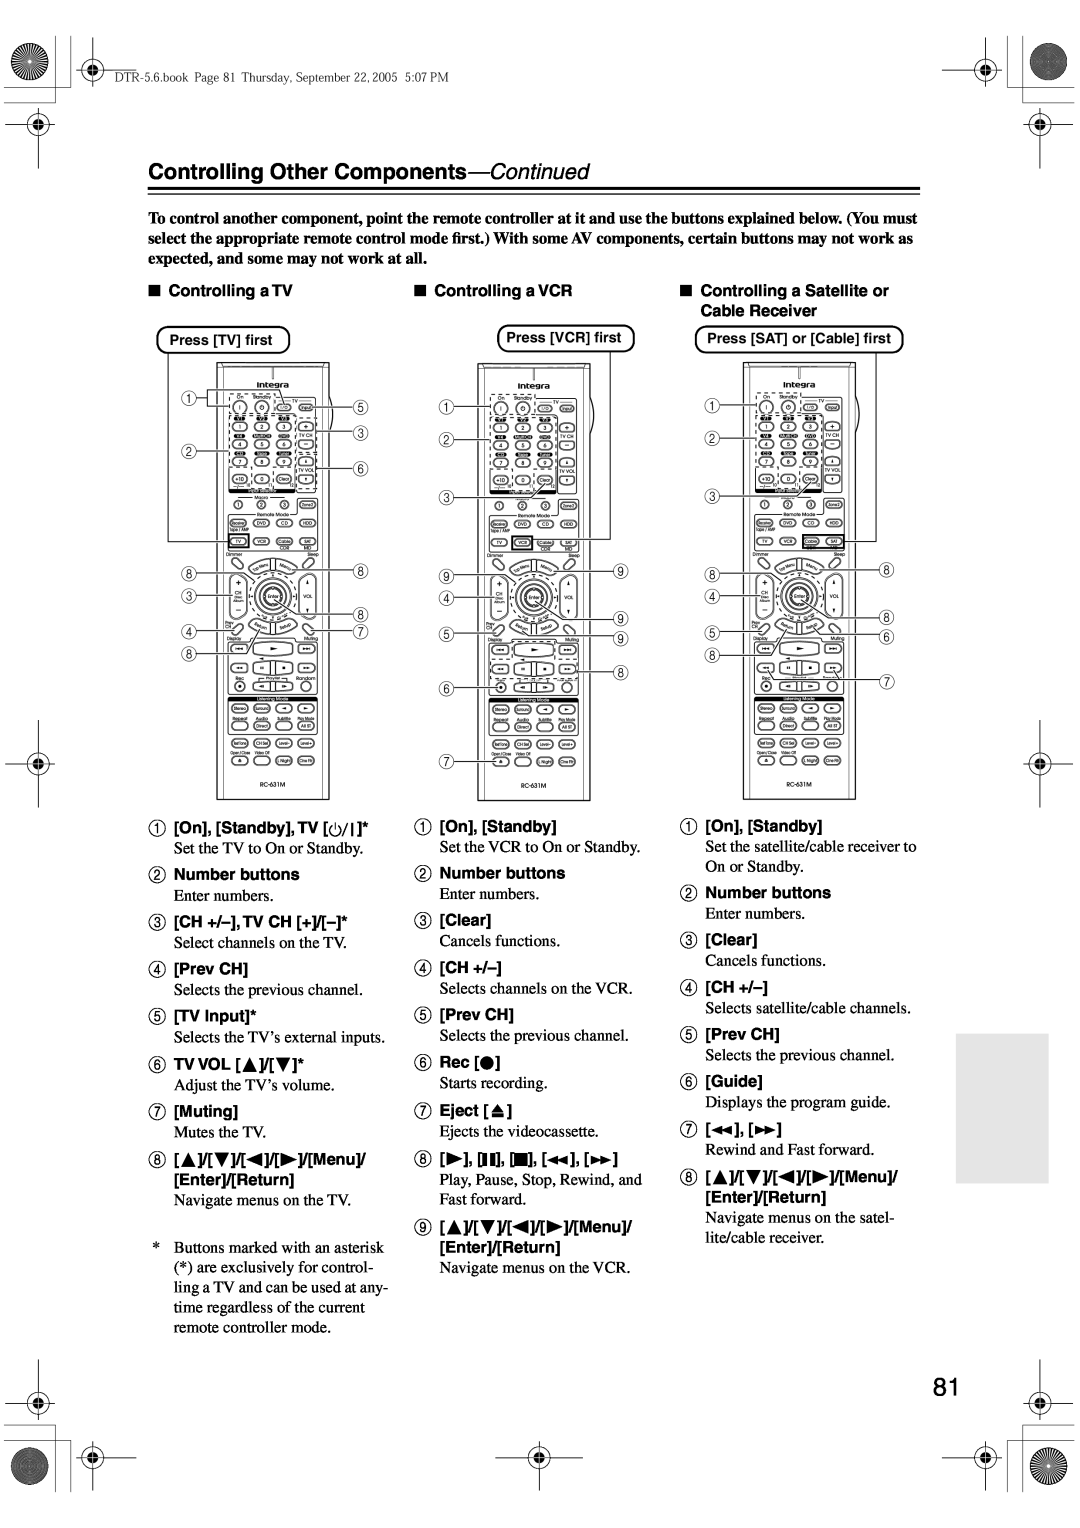 Integra DTR-5.6 instruction manual Controlling Other Components—Continued 